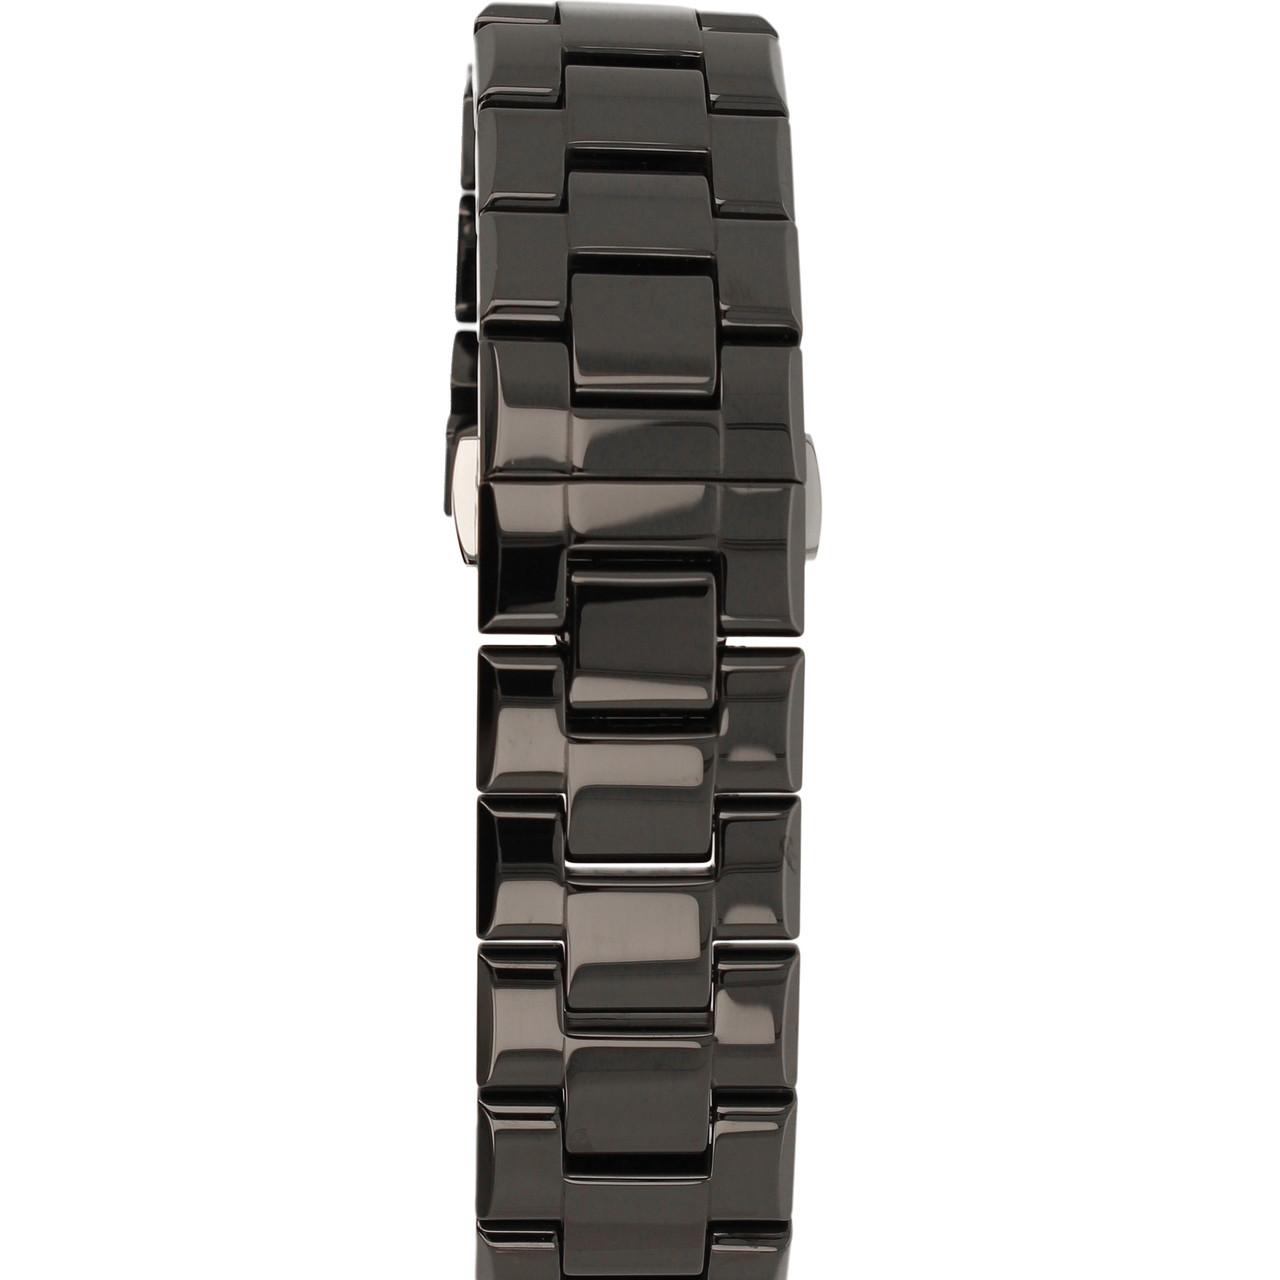 NEW GENUINE EMPORIO ARMANI MENS WATCH CERAMIC BLACK DIAL WITH SILVER TONE  AR1400 – Association of Evangelicals in Africa